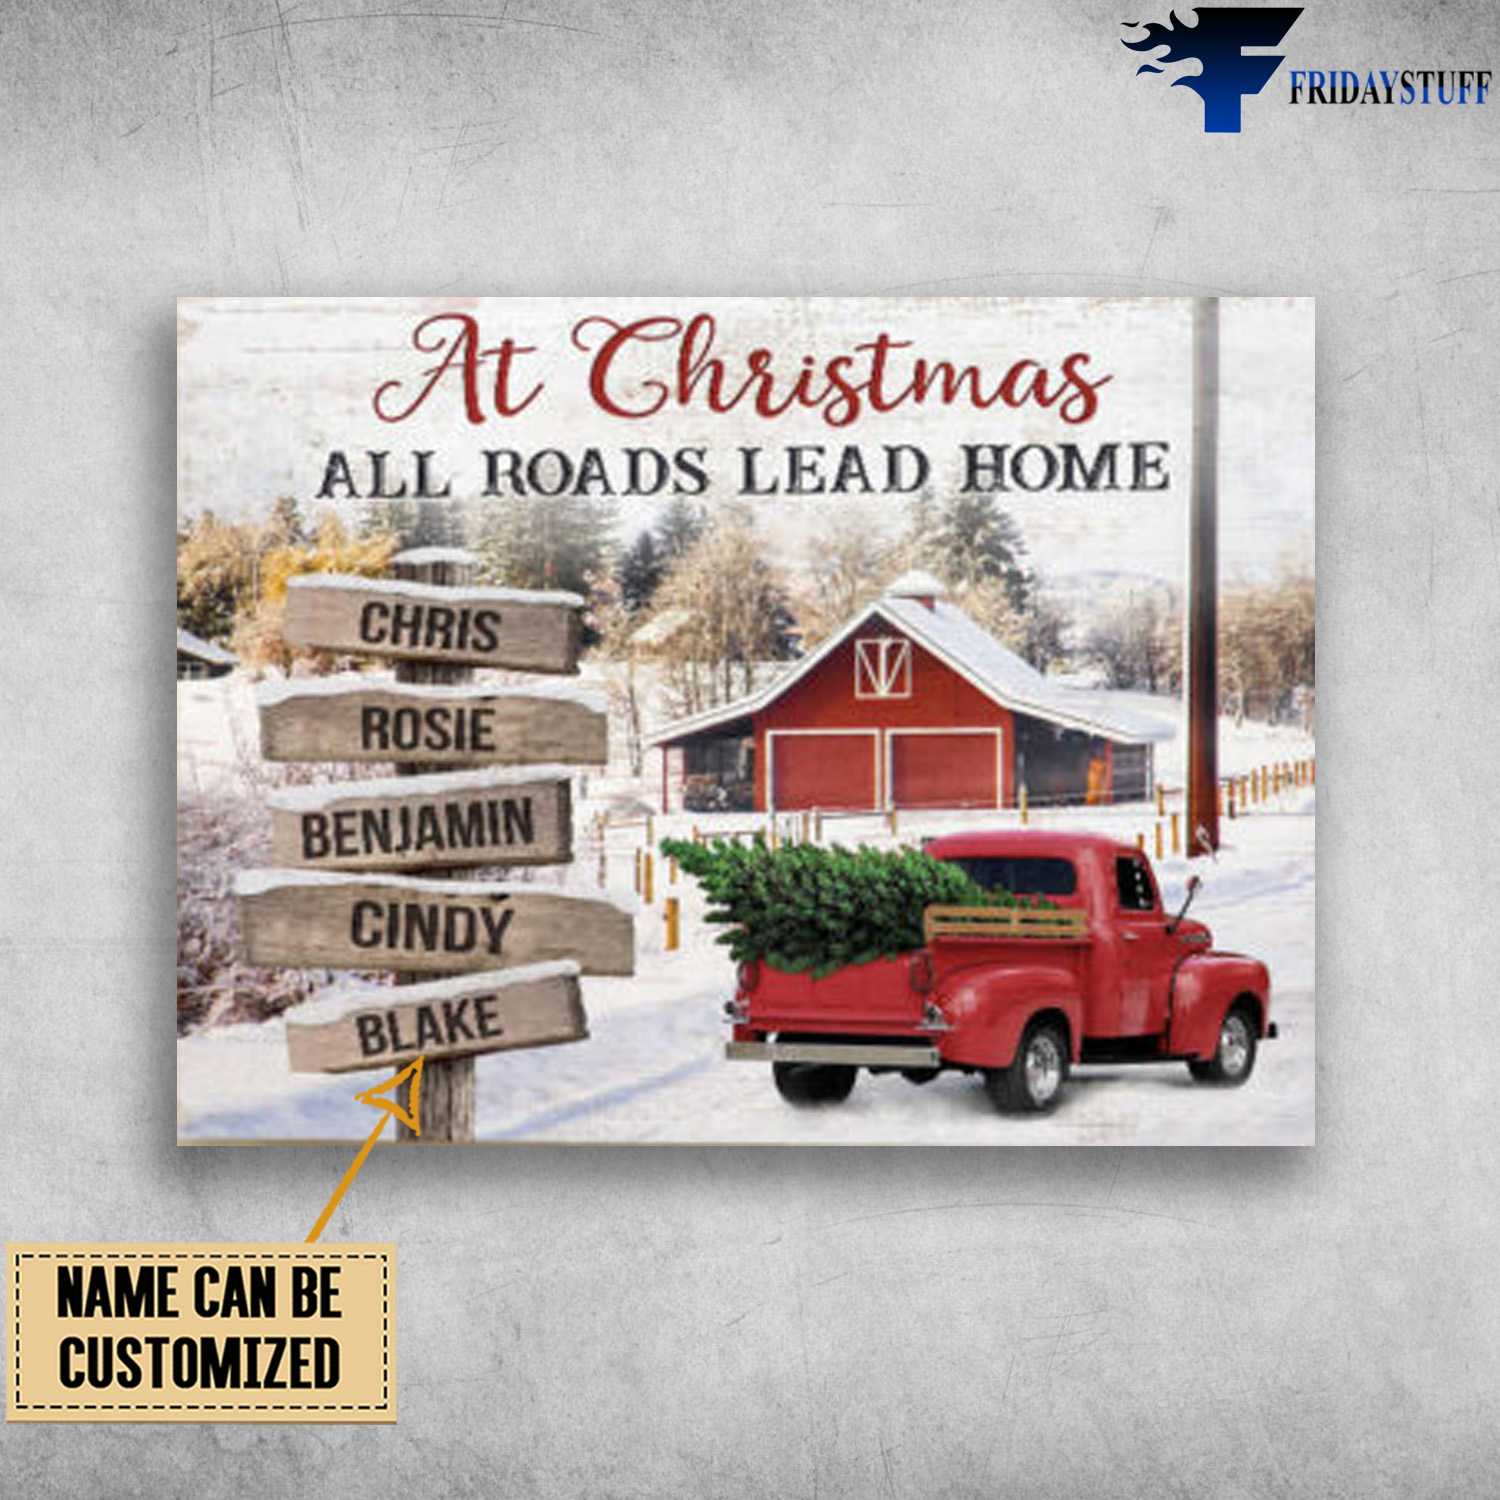 Christmas Truck - At Christmas, All Roads Lead Home